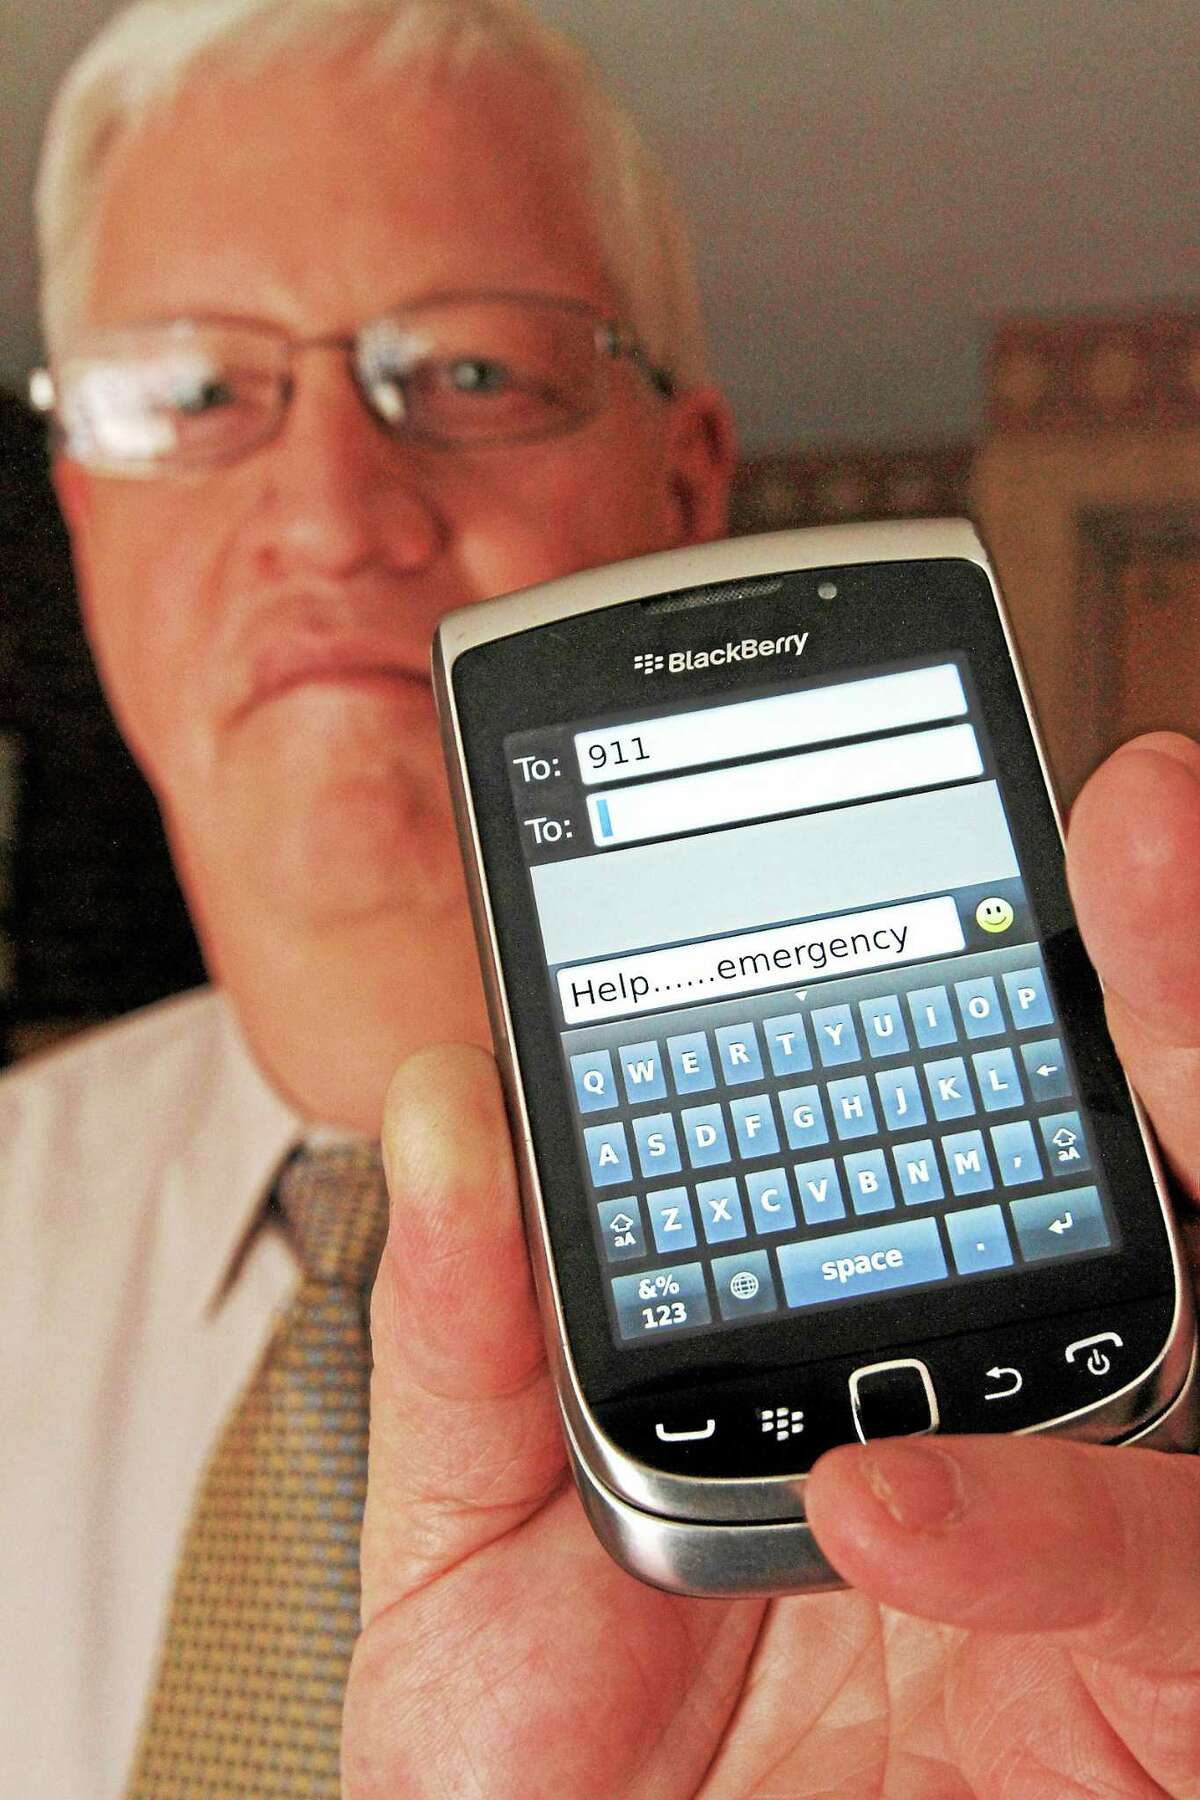 In this April 18, 2012 photo, David Tucker, executive director of Vermont’s Enhanced 911 Board, holds a smartphone in Montpelier, Vt. Tucker says the state is the first in the country where customers of the four major wireless carriers can send text messages to 911. As of Monday, May 19, 2014, T-Mobile customers in Vermont are now able to text 911. Verizon, AT&T and Sprint began the service earlier.